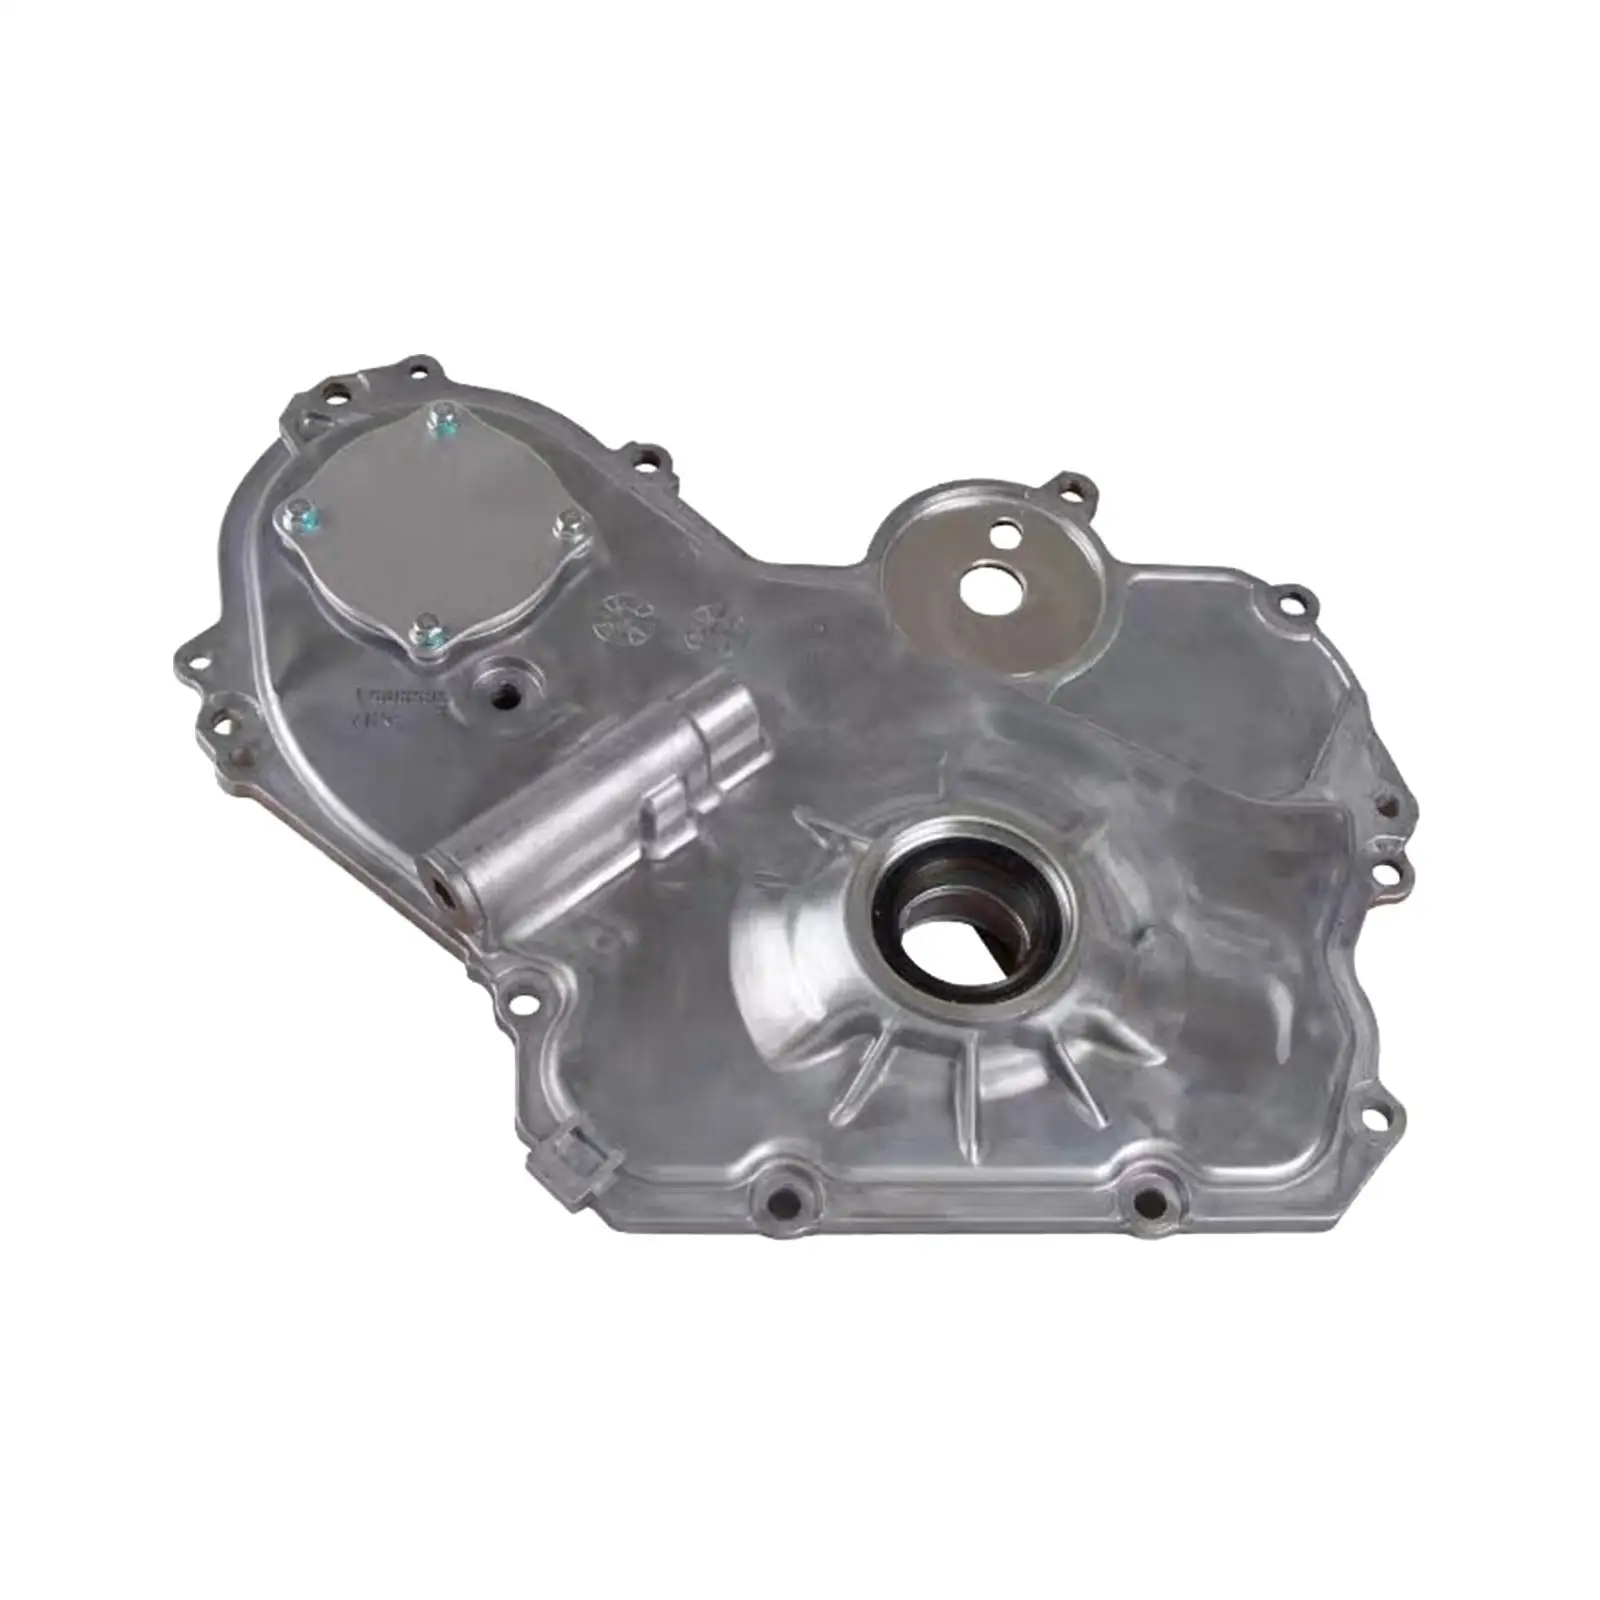 12584621 Engine Oil Pump Repair Parts 90537914 12606580 for Regal Verano Durable Easy to Install Car Accessories